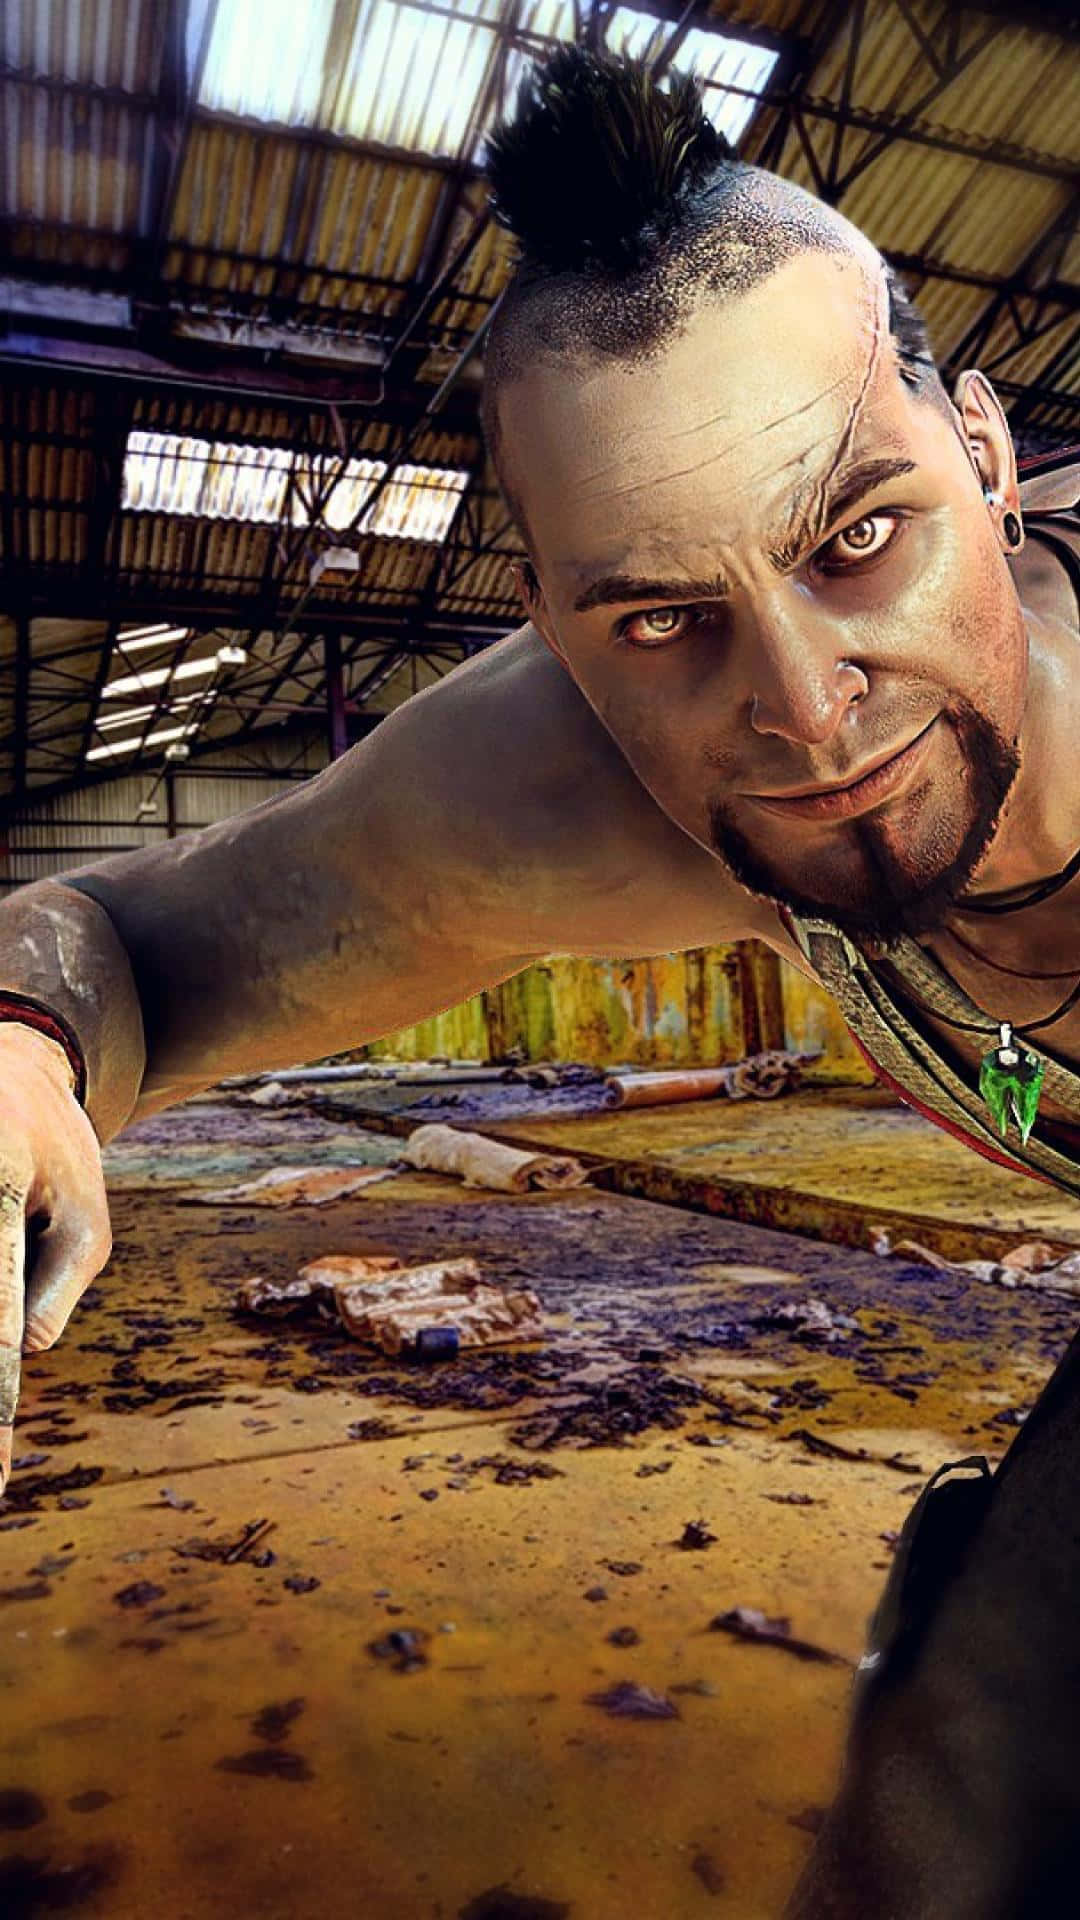 Iphone Xs Max Far Cry 3 Background Vaas Montenegro Saw